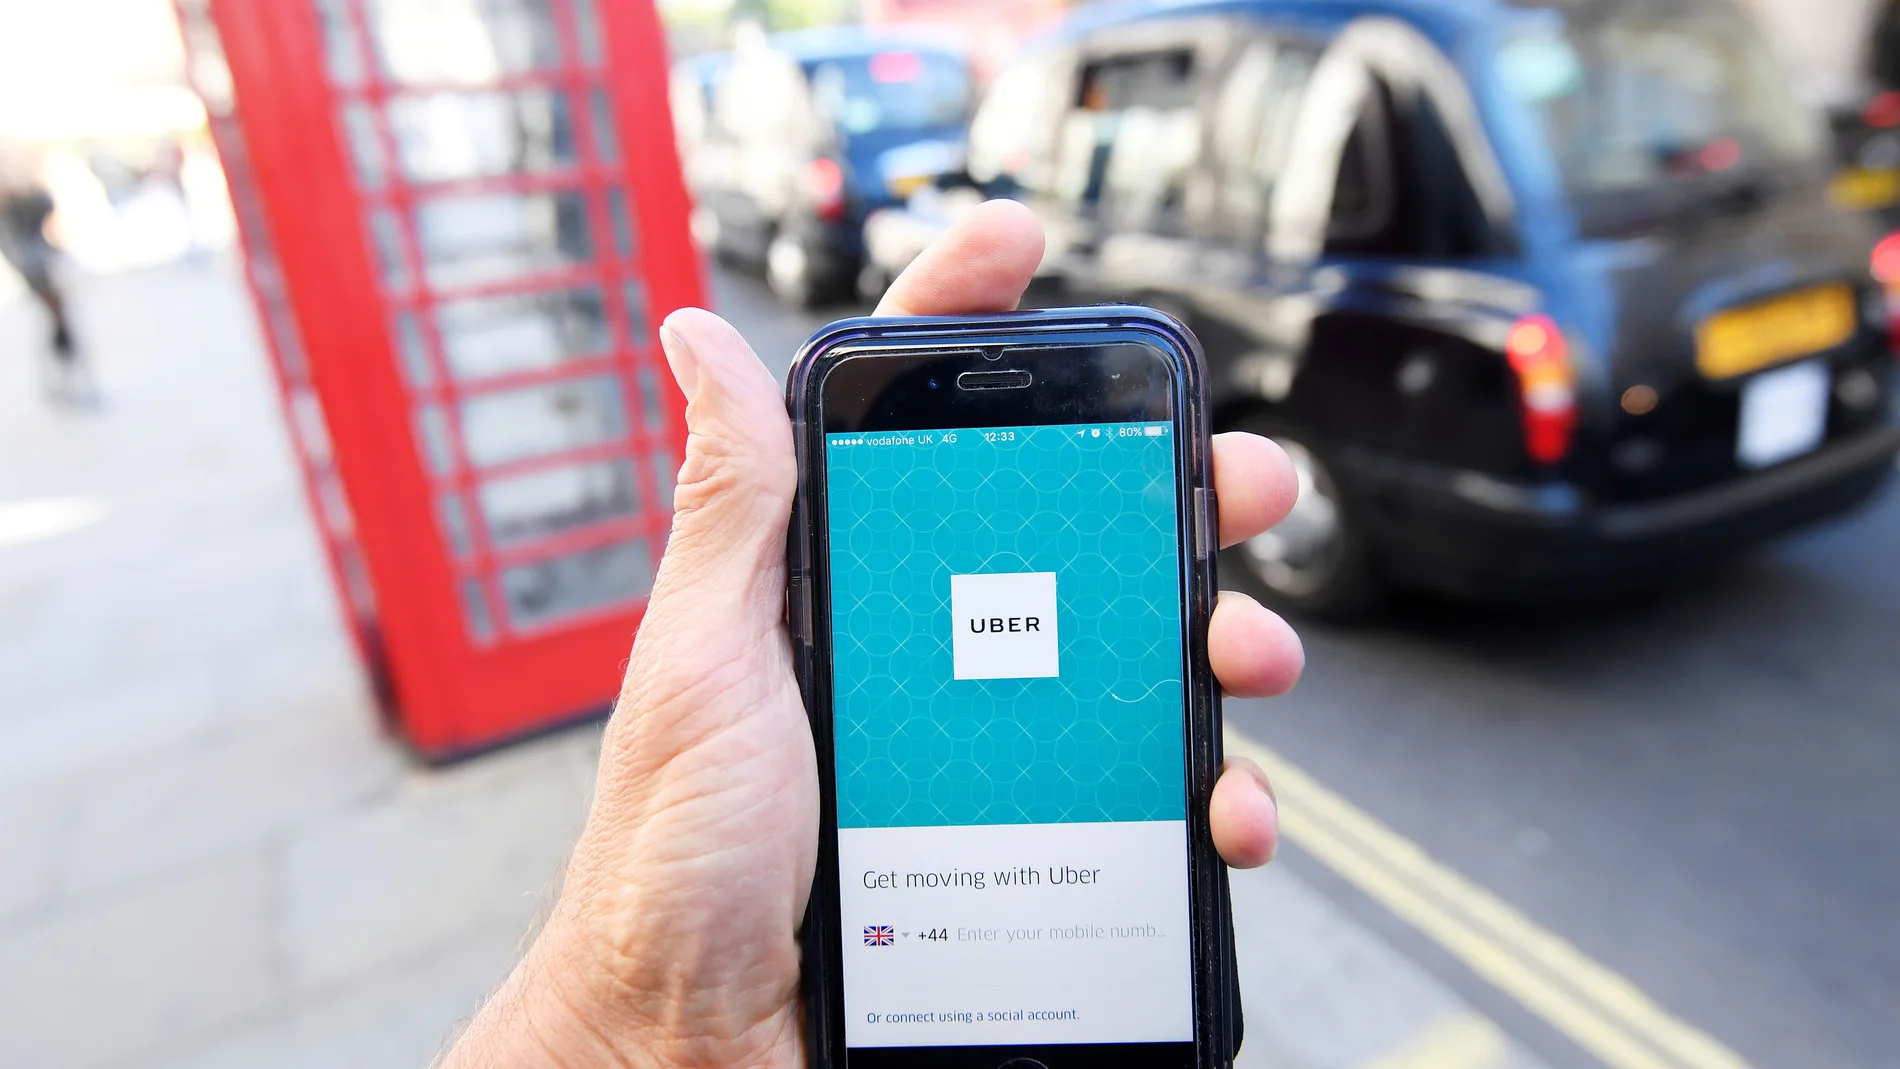 FILE PHOTO: A photo illustration shows a London taxi passing as the Uber app logo is displayed on a mobile telephone, as it is held up for a posed photograph in central London